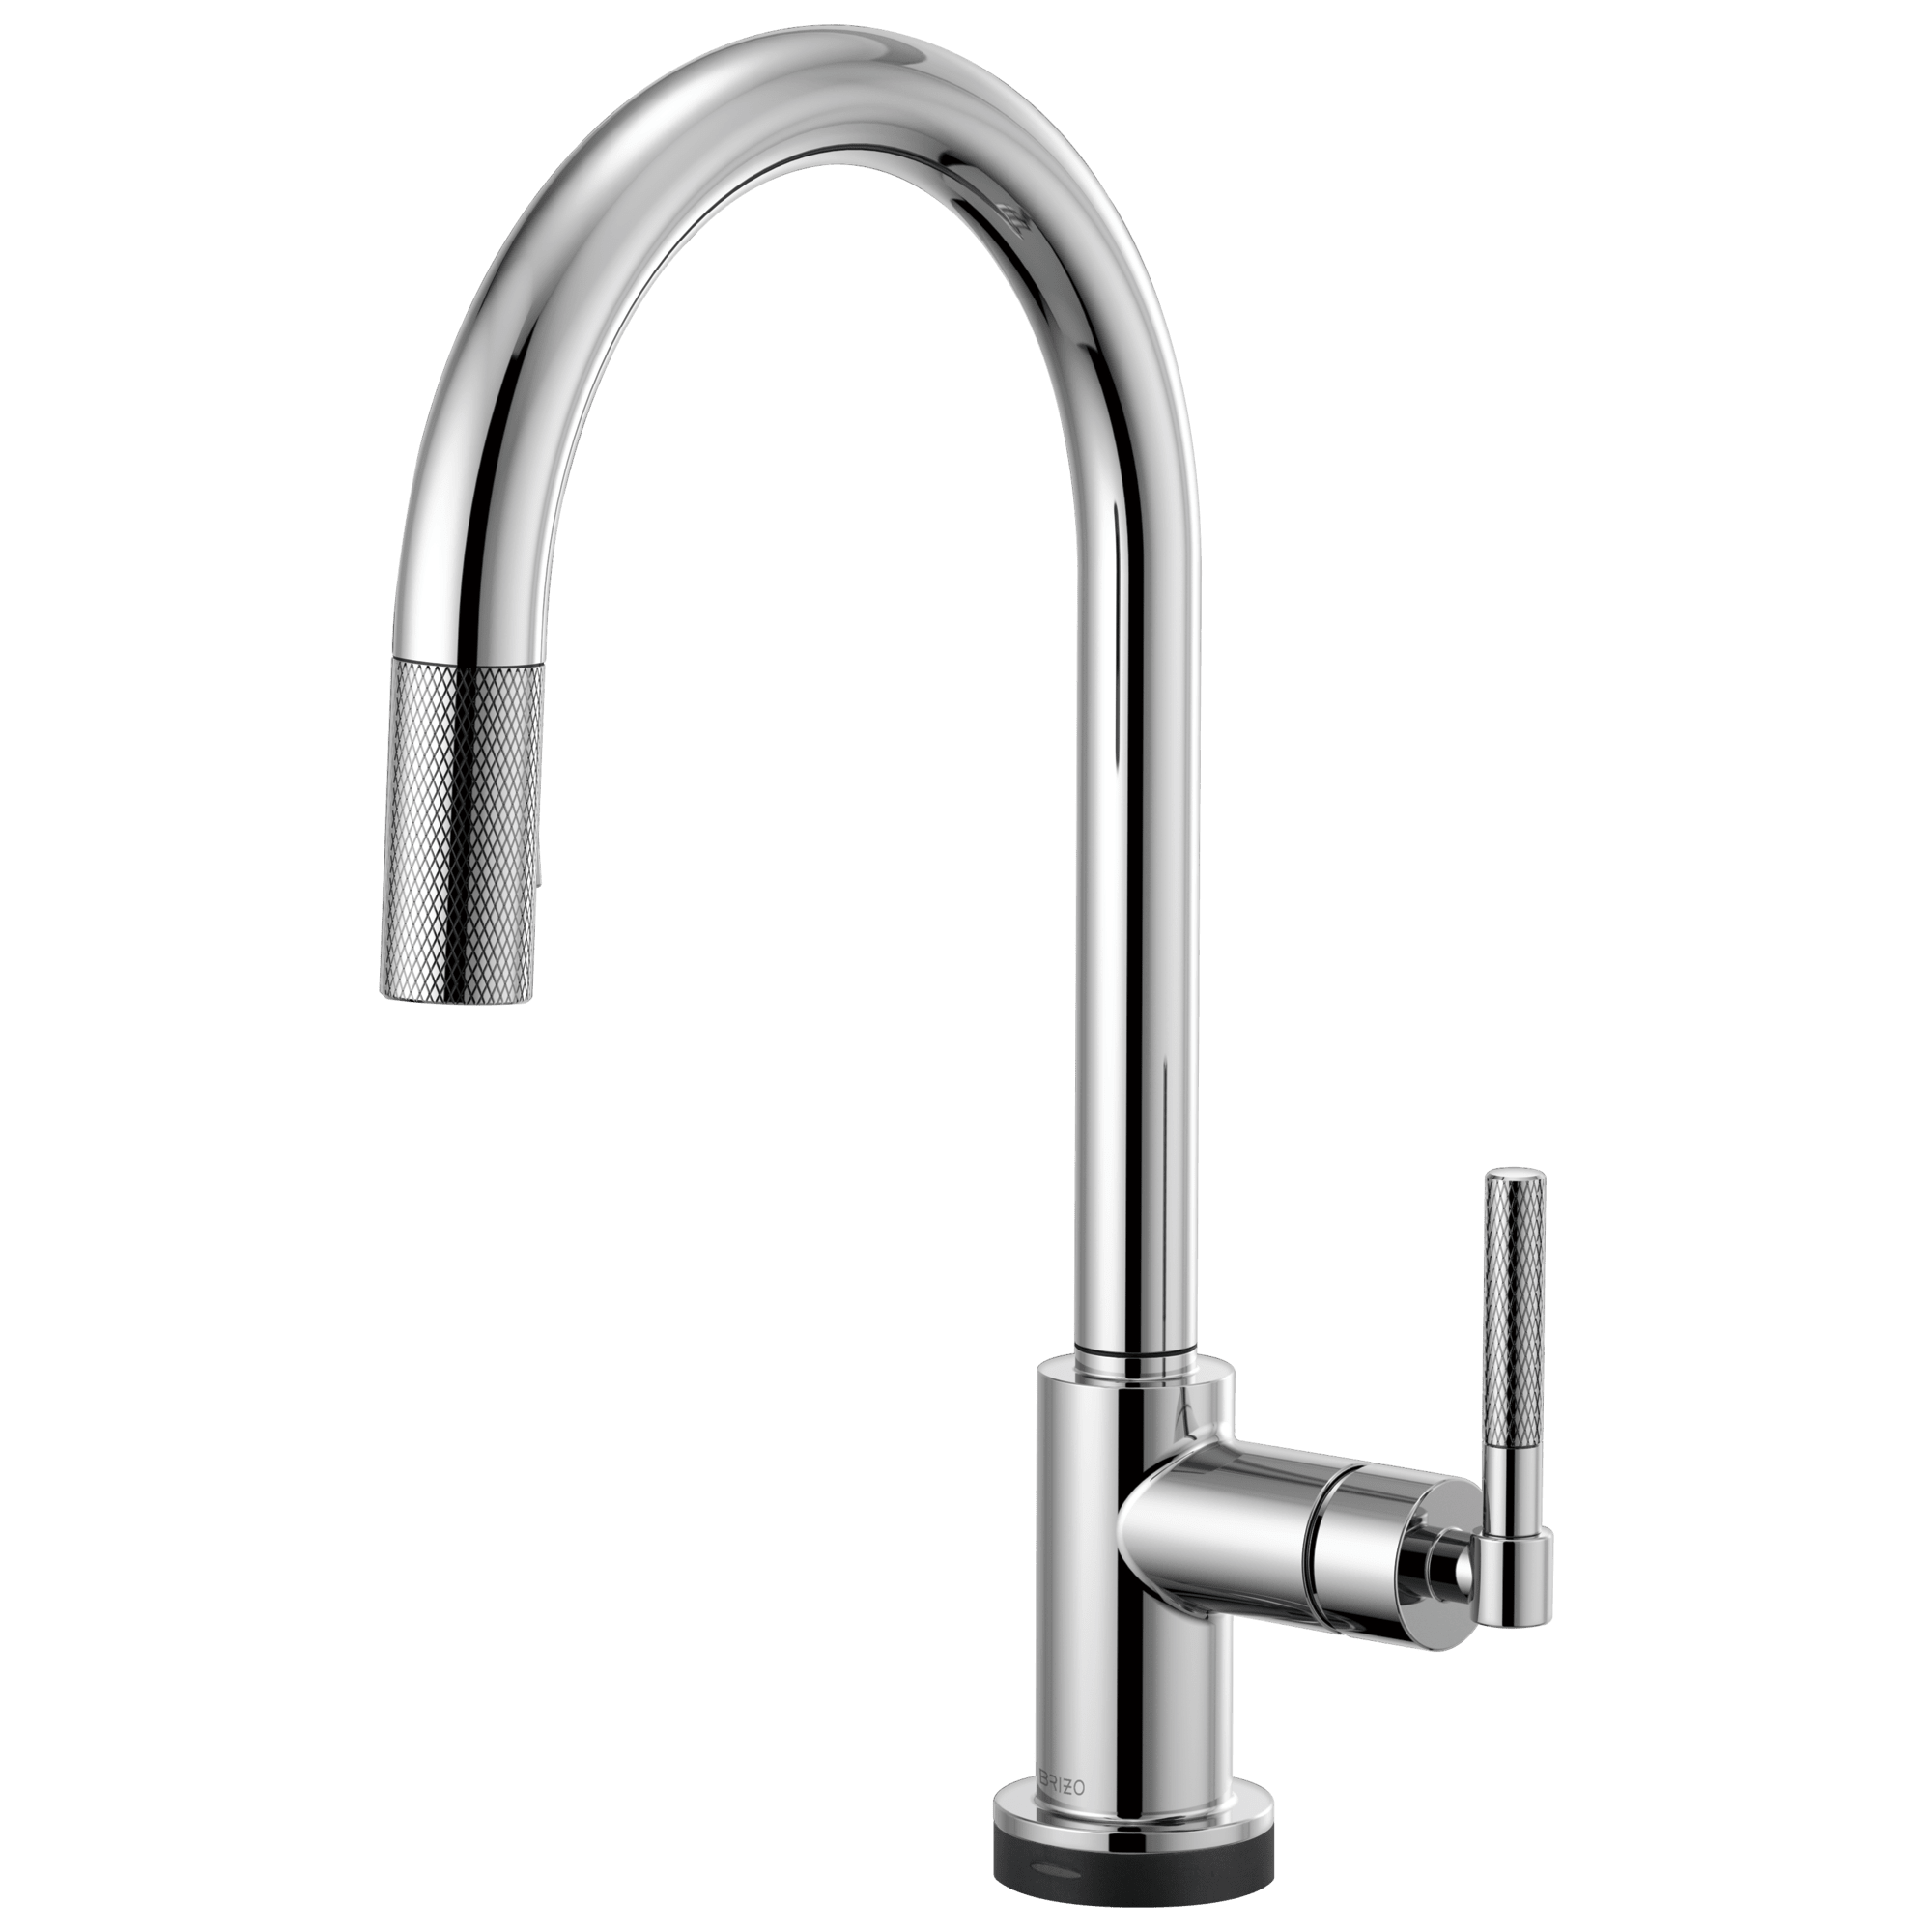 Brizo 64043lf Litze Kitchen Faucet With Smart Touch Technology